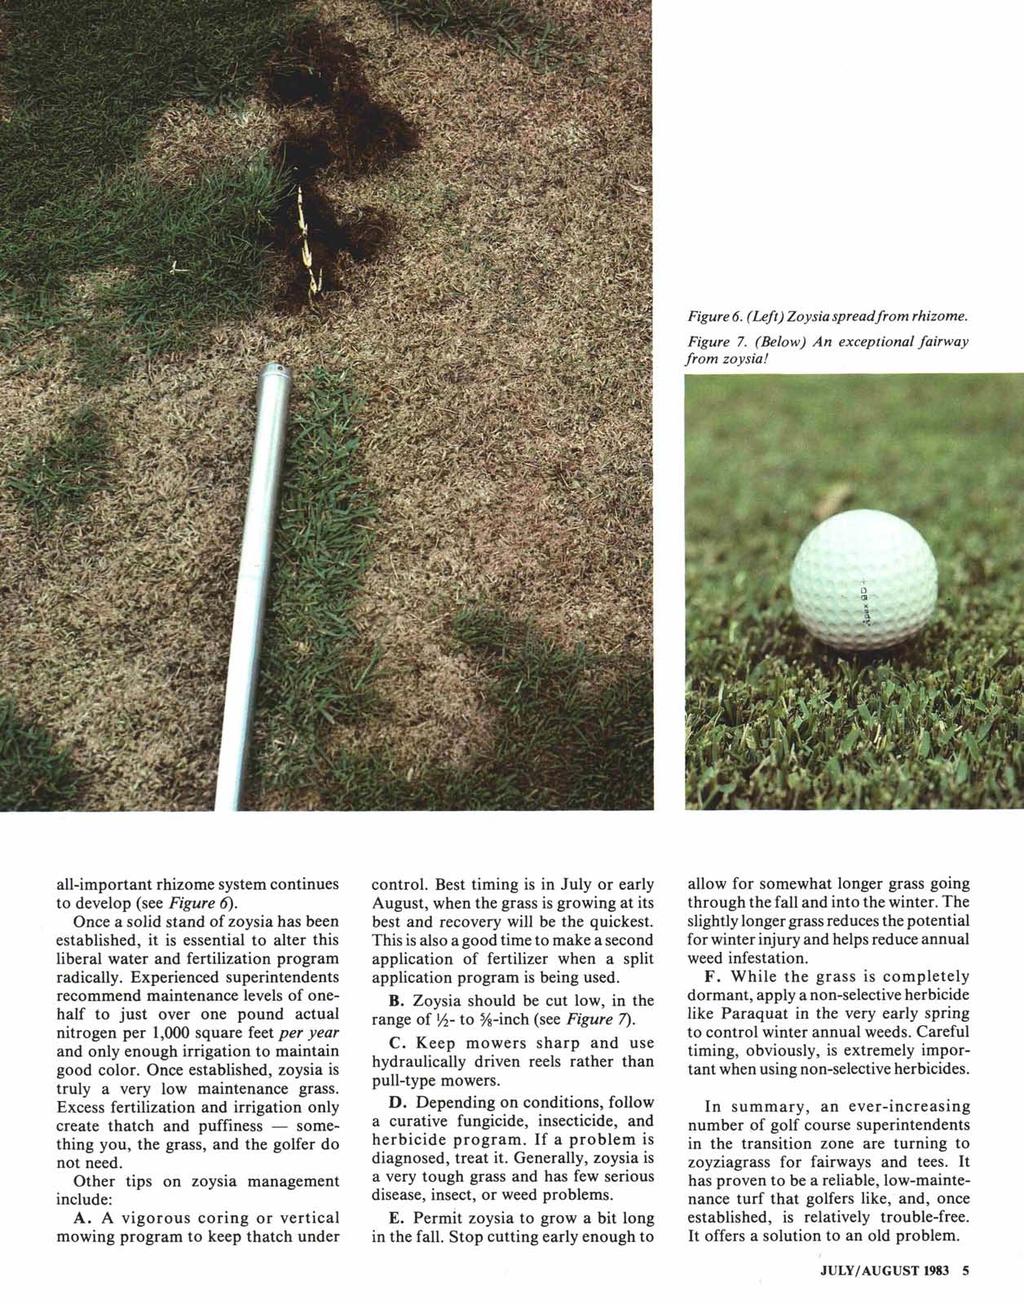 Figure 6. (Left) Zoysia spreadfrom rhizome. Figure 7. (Below) An exceptional fairway from zoysia! all-important rhizome system continues to develop (see Figure 6).